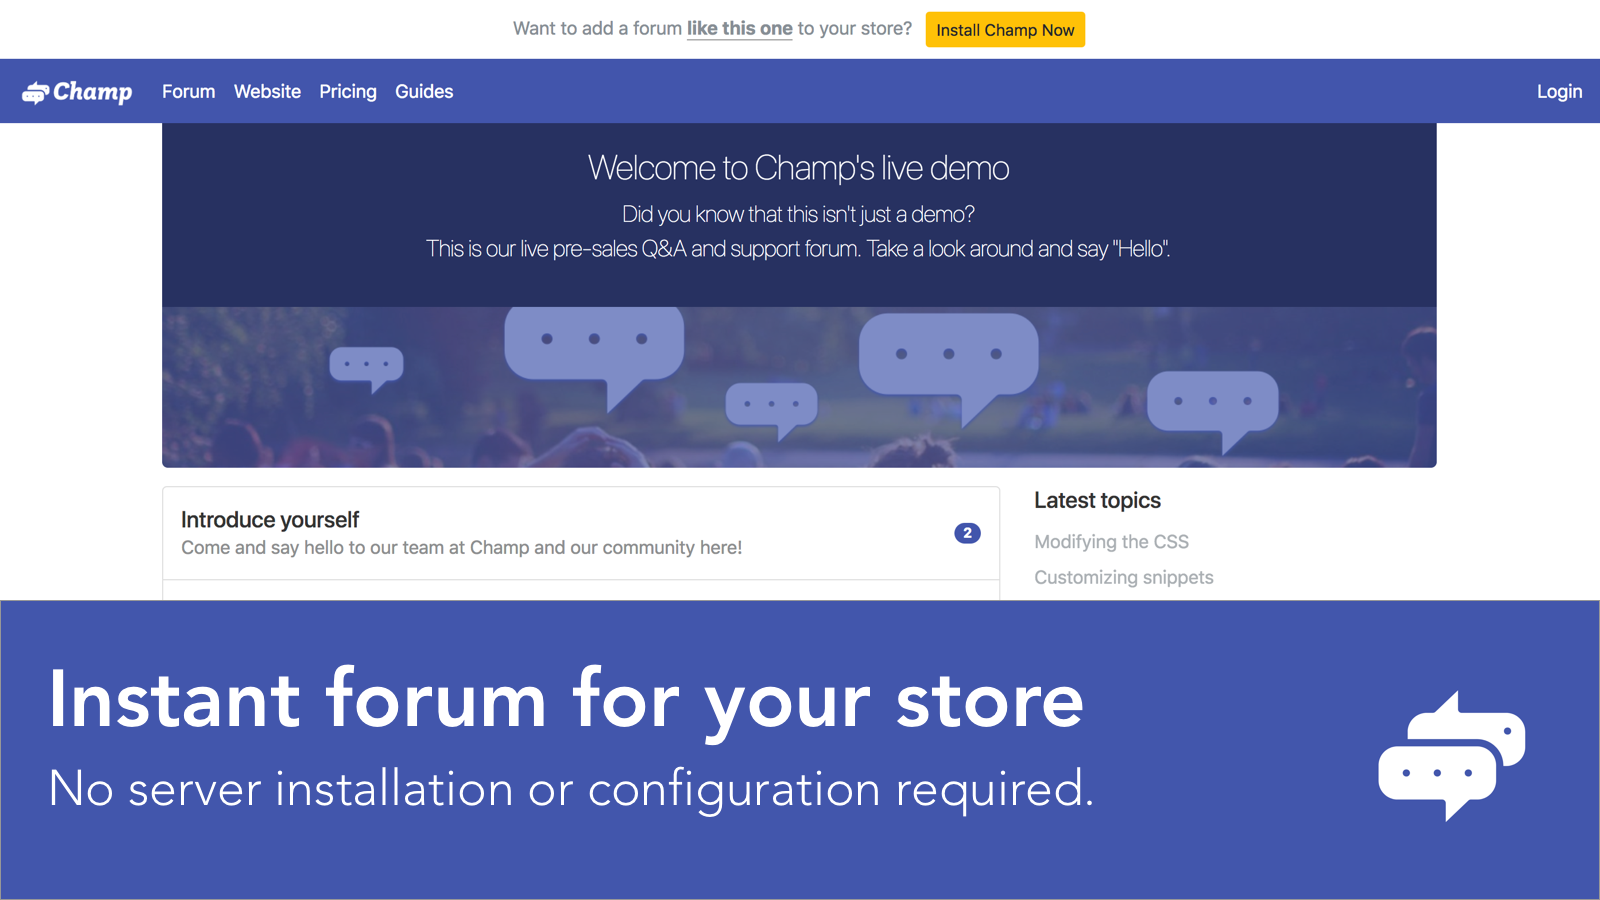 Easily add a forum to your store